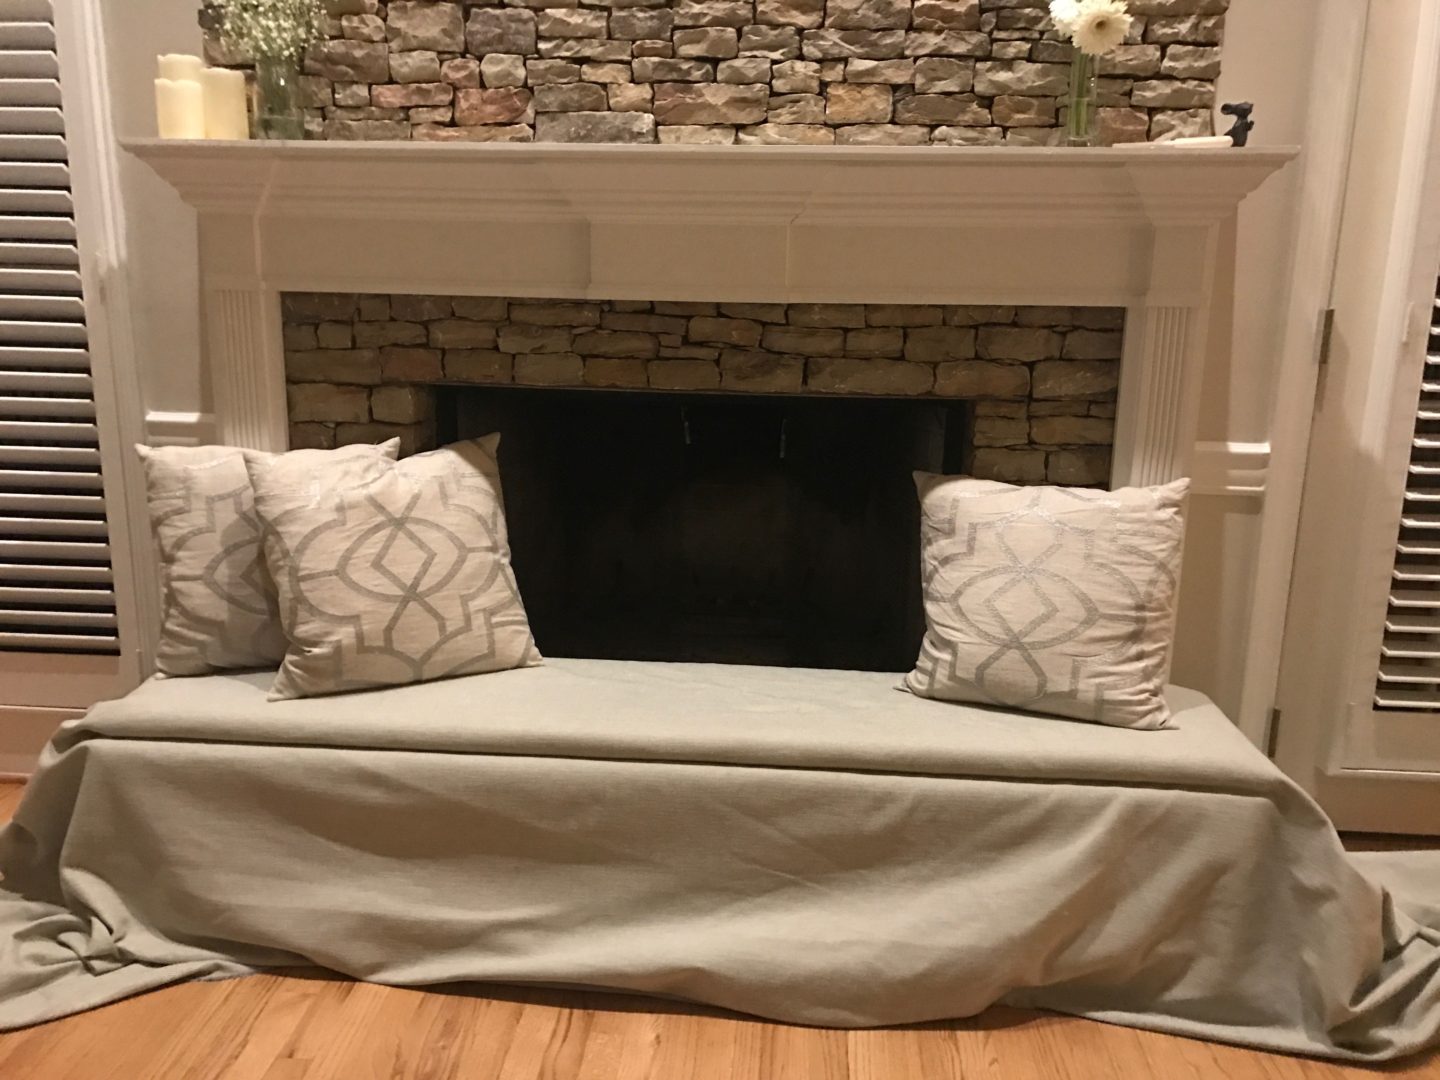 Baby proofed fireplace created with foam bench over the hearth and bookcase  insert